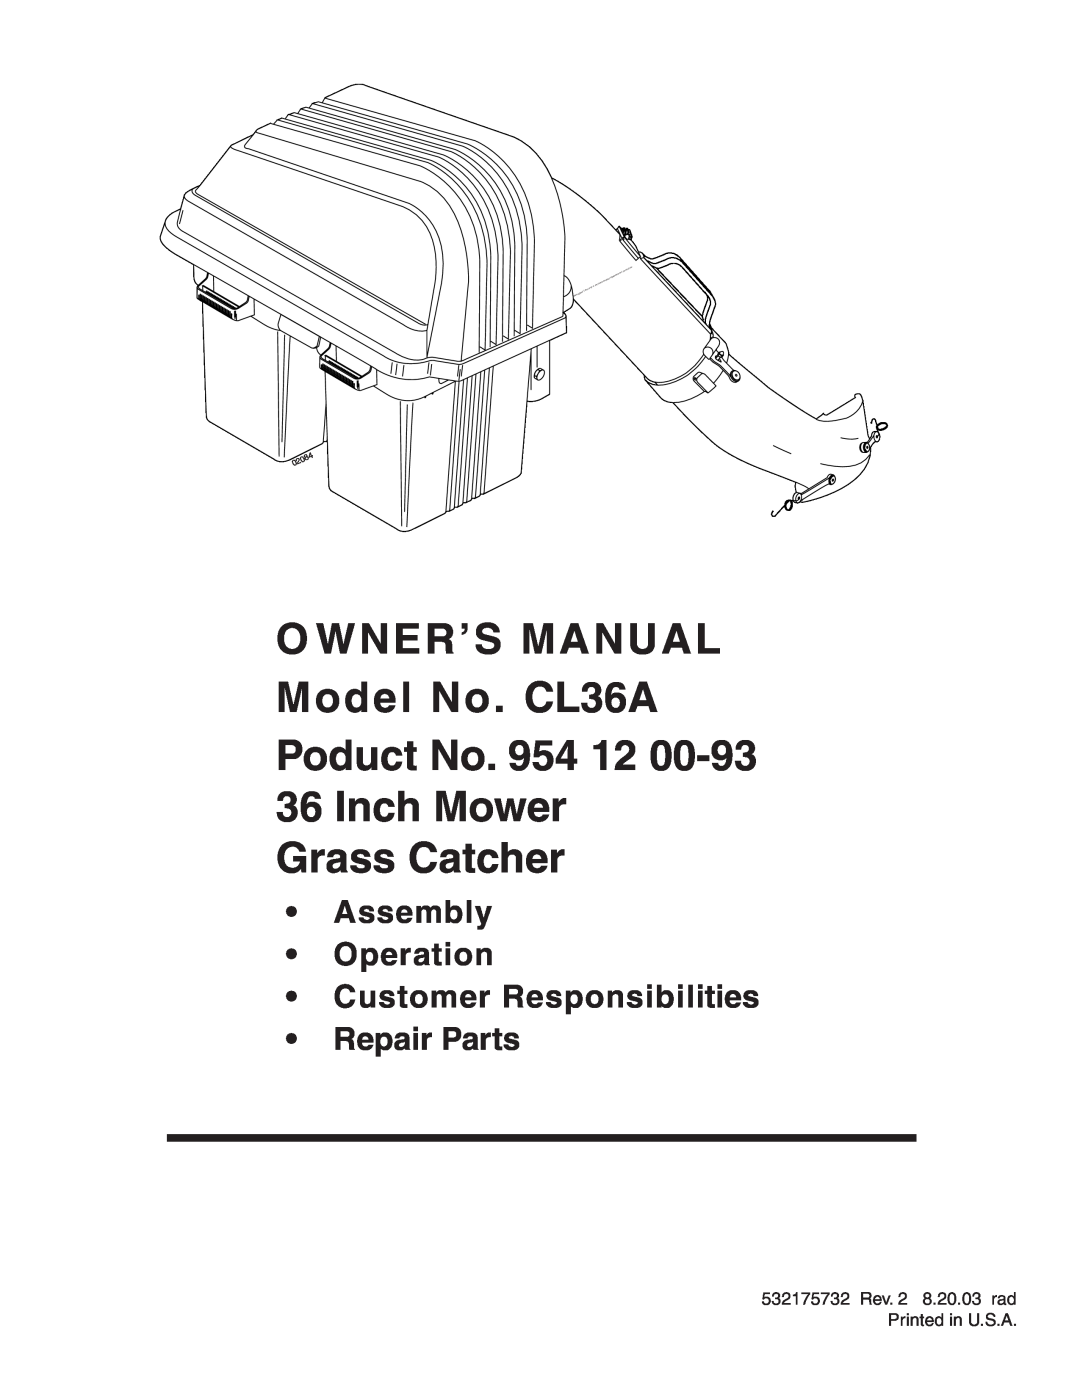 Poulan 532175732 owner manual O WNER’S MANUAL Model No. CL36A Poduct No. 954 12 36 Inch Mower, Grass Catcher, NIN e m 